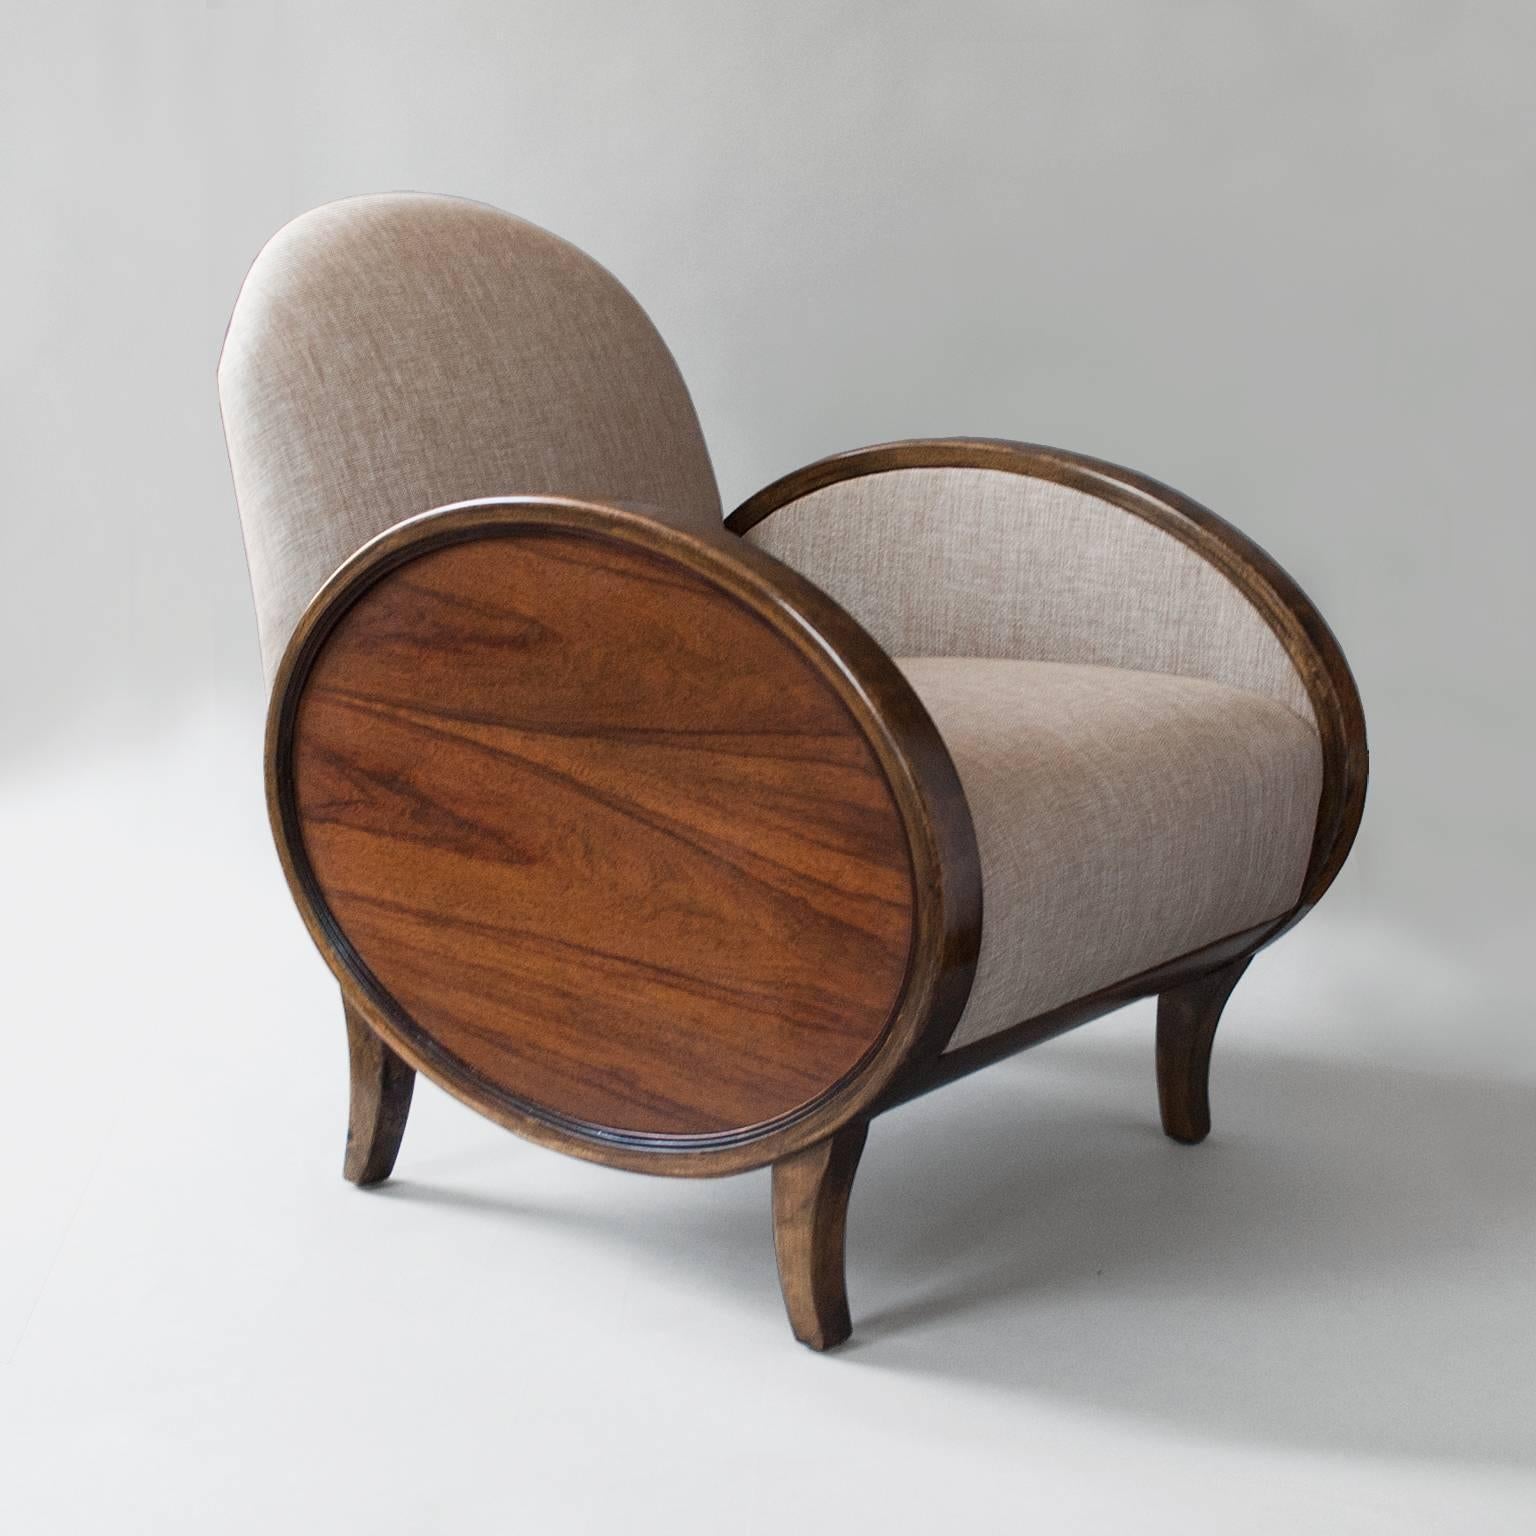 Polished Scandinavian Modern Swedish Art Deco Chairs with Oval Rosewood Panels